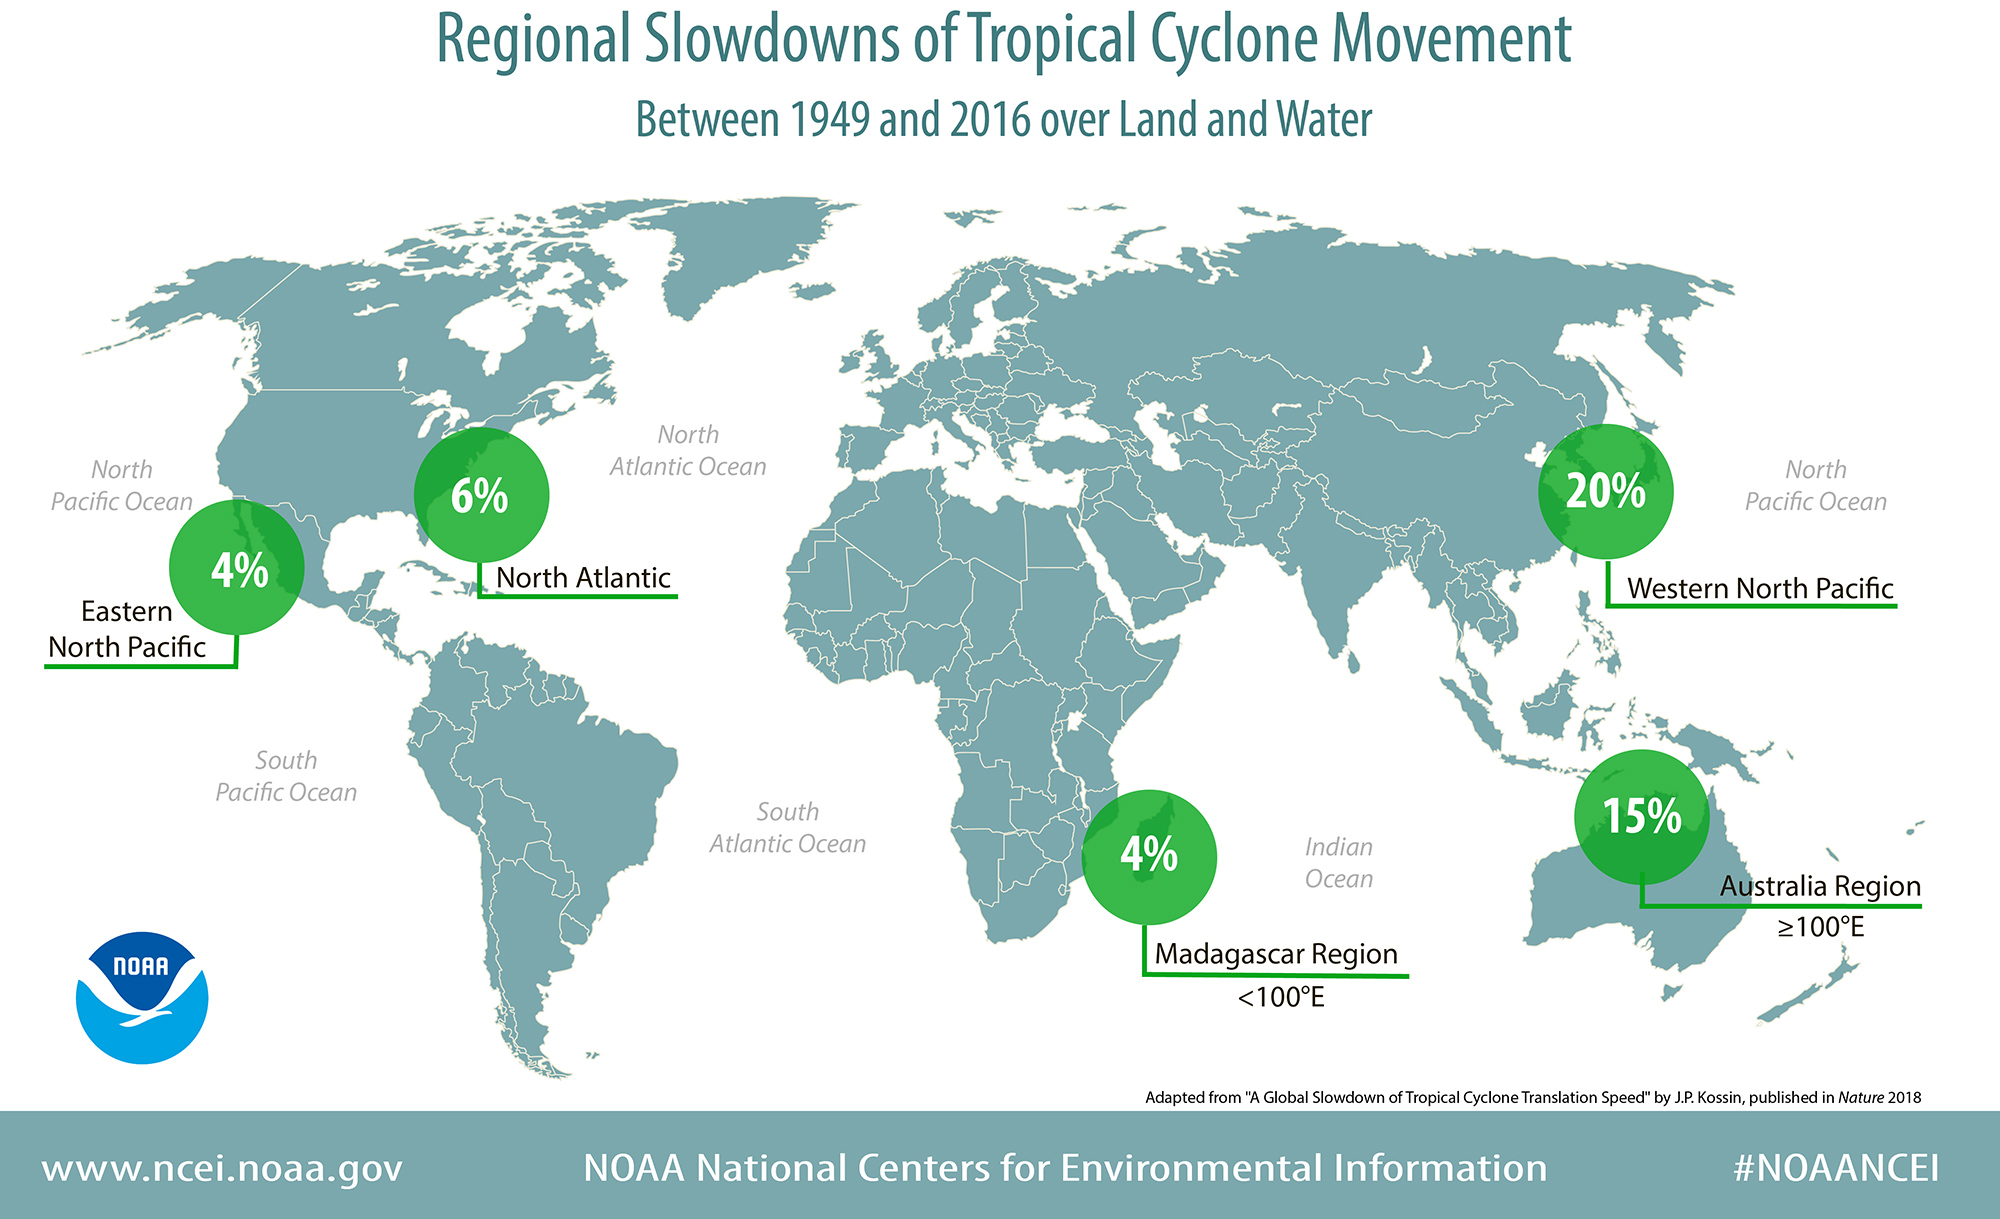 map of the world showing Regional Slowdowns of Tropical Cyclone Movement Between 1949 and 2016 over Land and Water